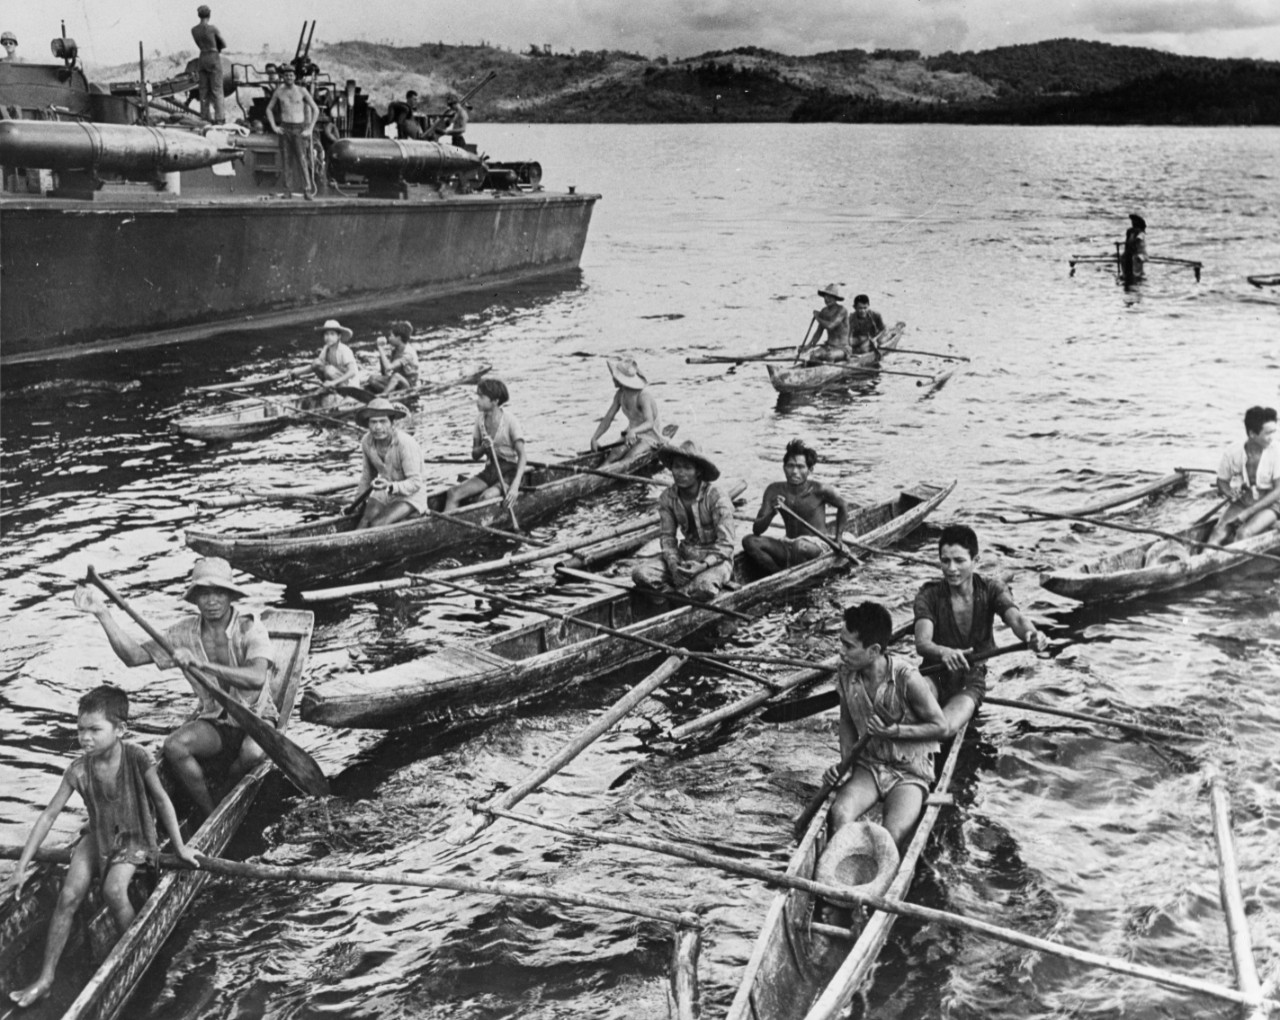 Rescue operations in Surigao Strait, Philippines, searching for Japanese survivors, October 1944